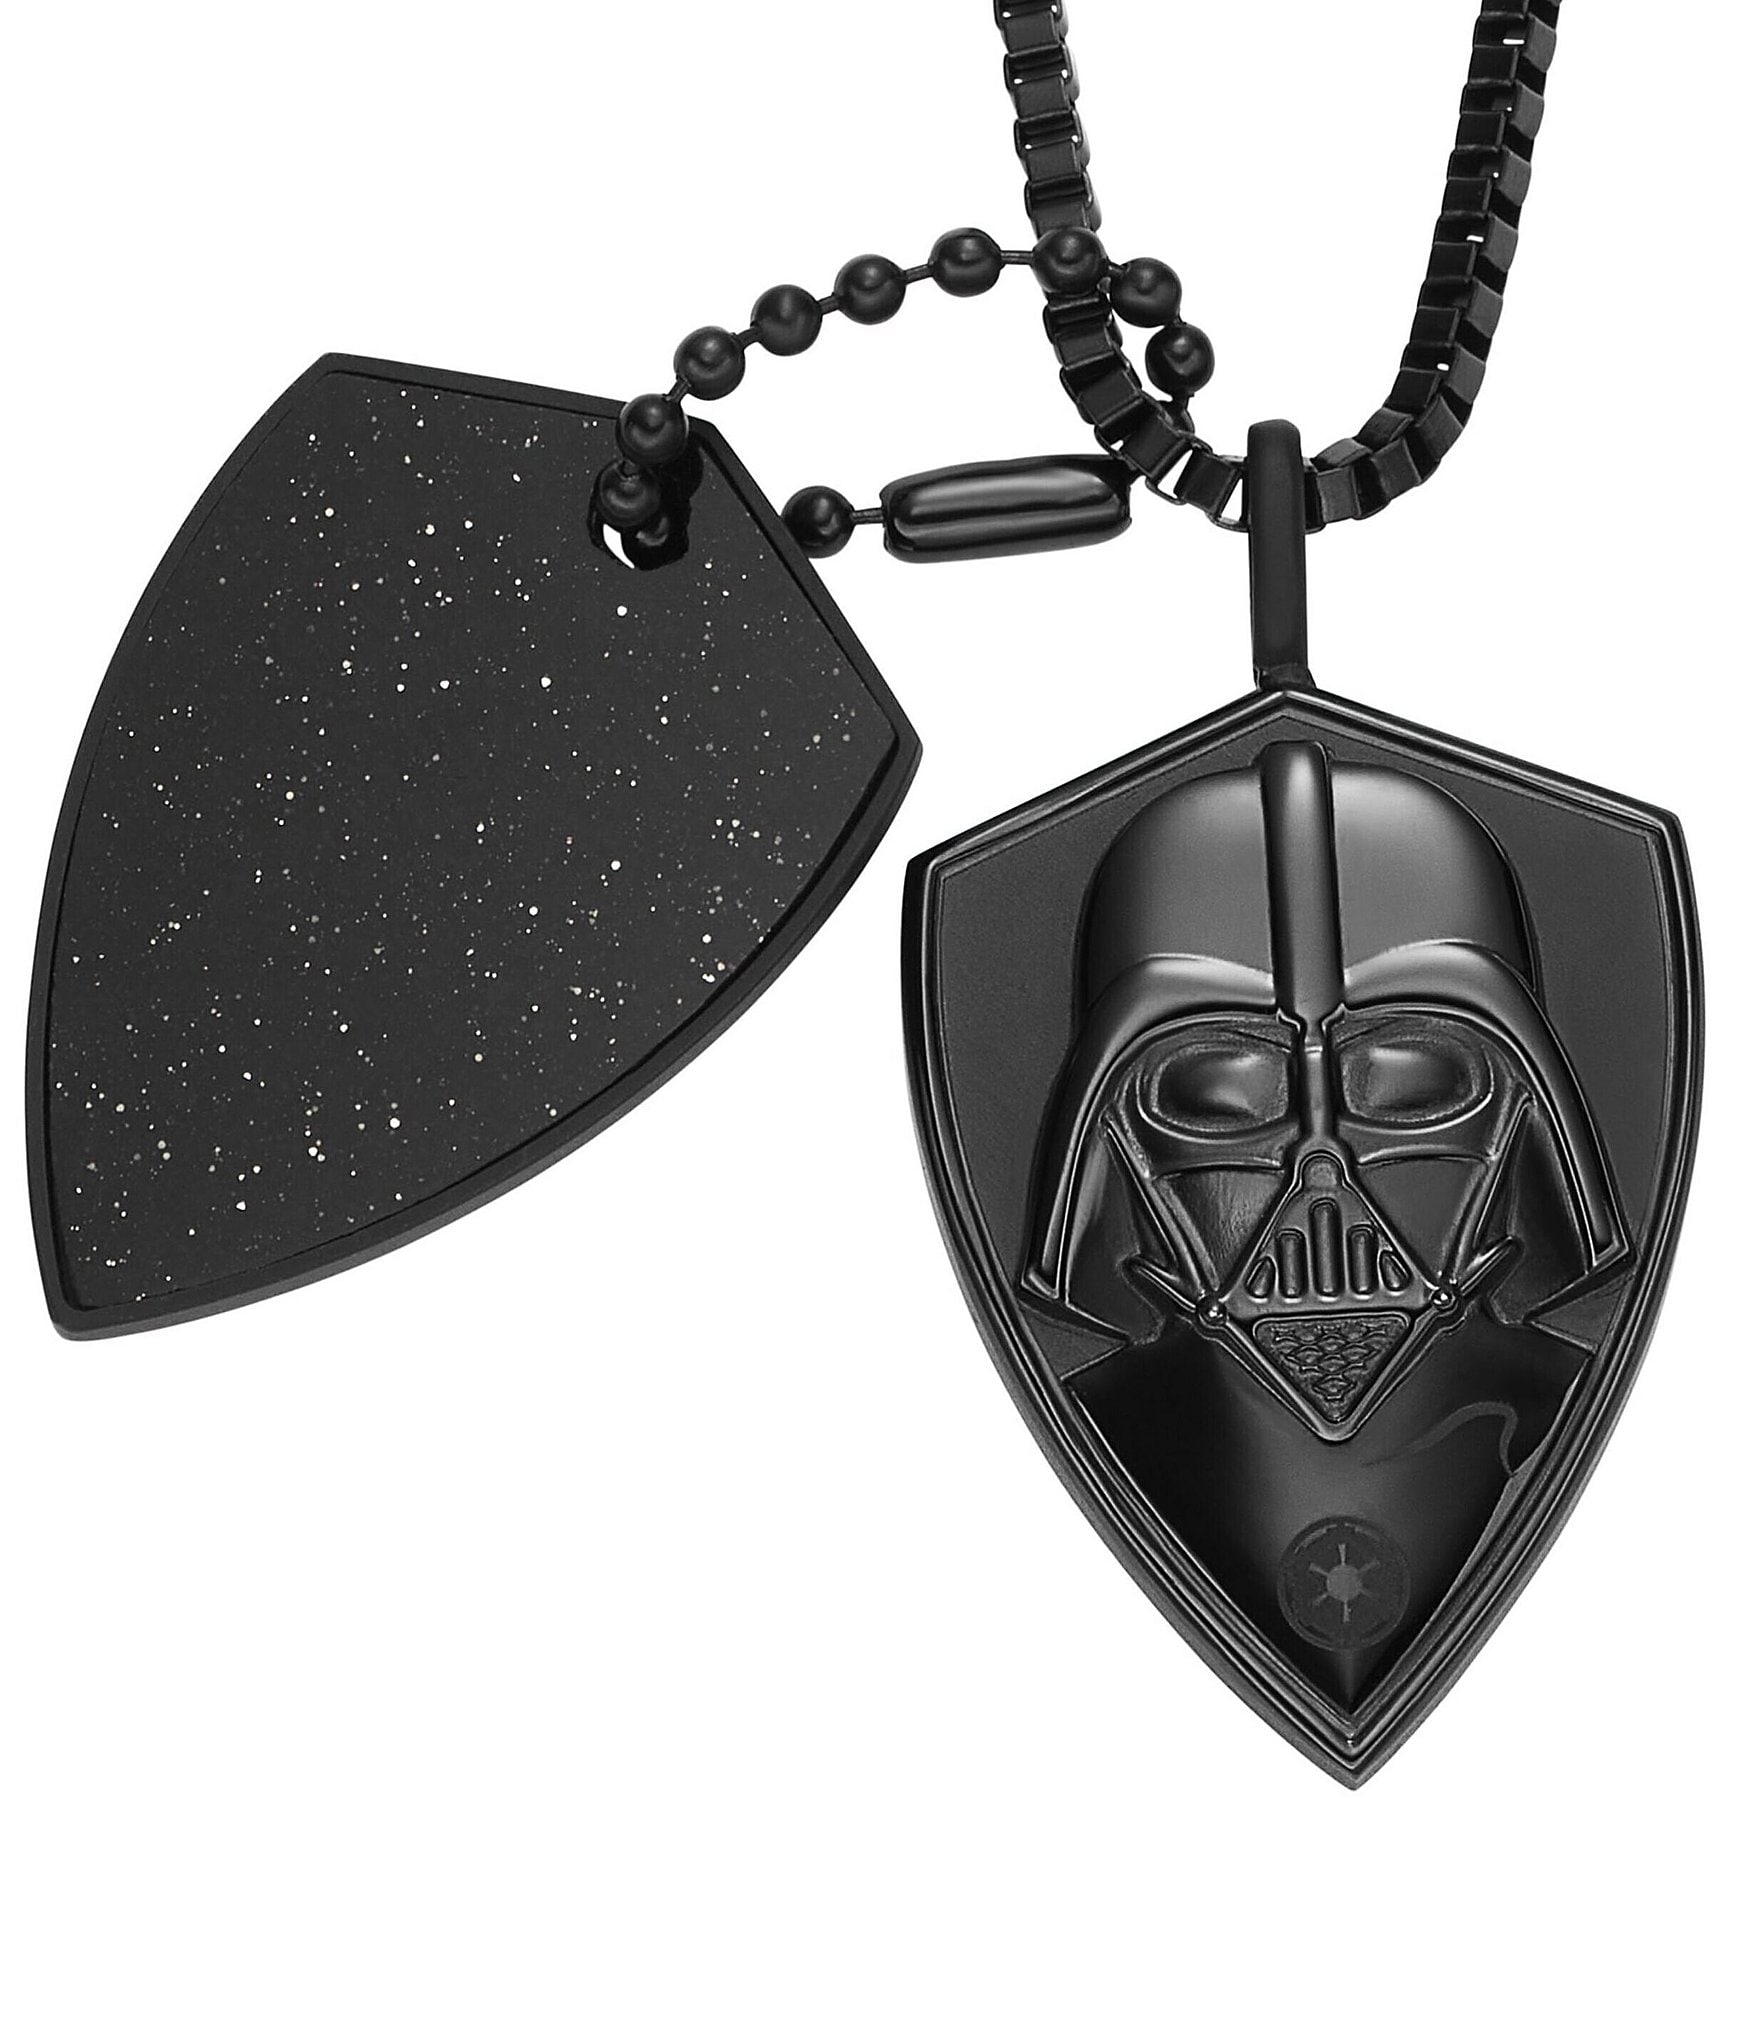 Disney Movie Jewelry Star Wars Necklace Millennium Falcon Darth Vader  Pendant Necklace For Fans Souvenirs Men Women Jewelry Gift